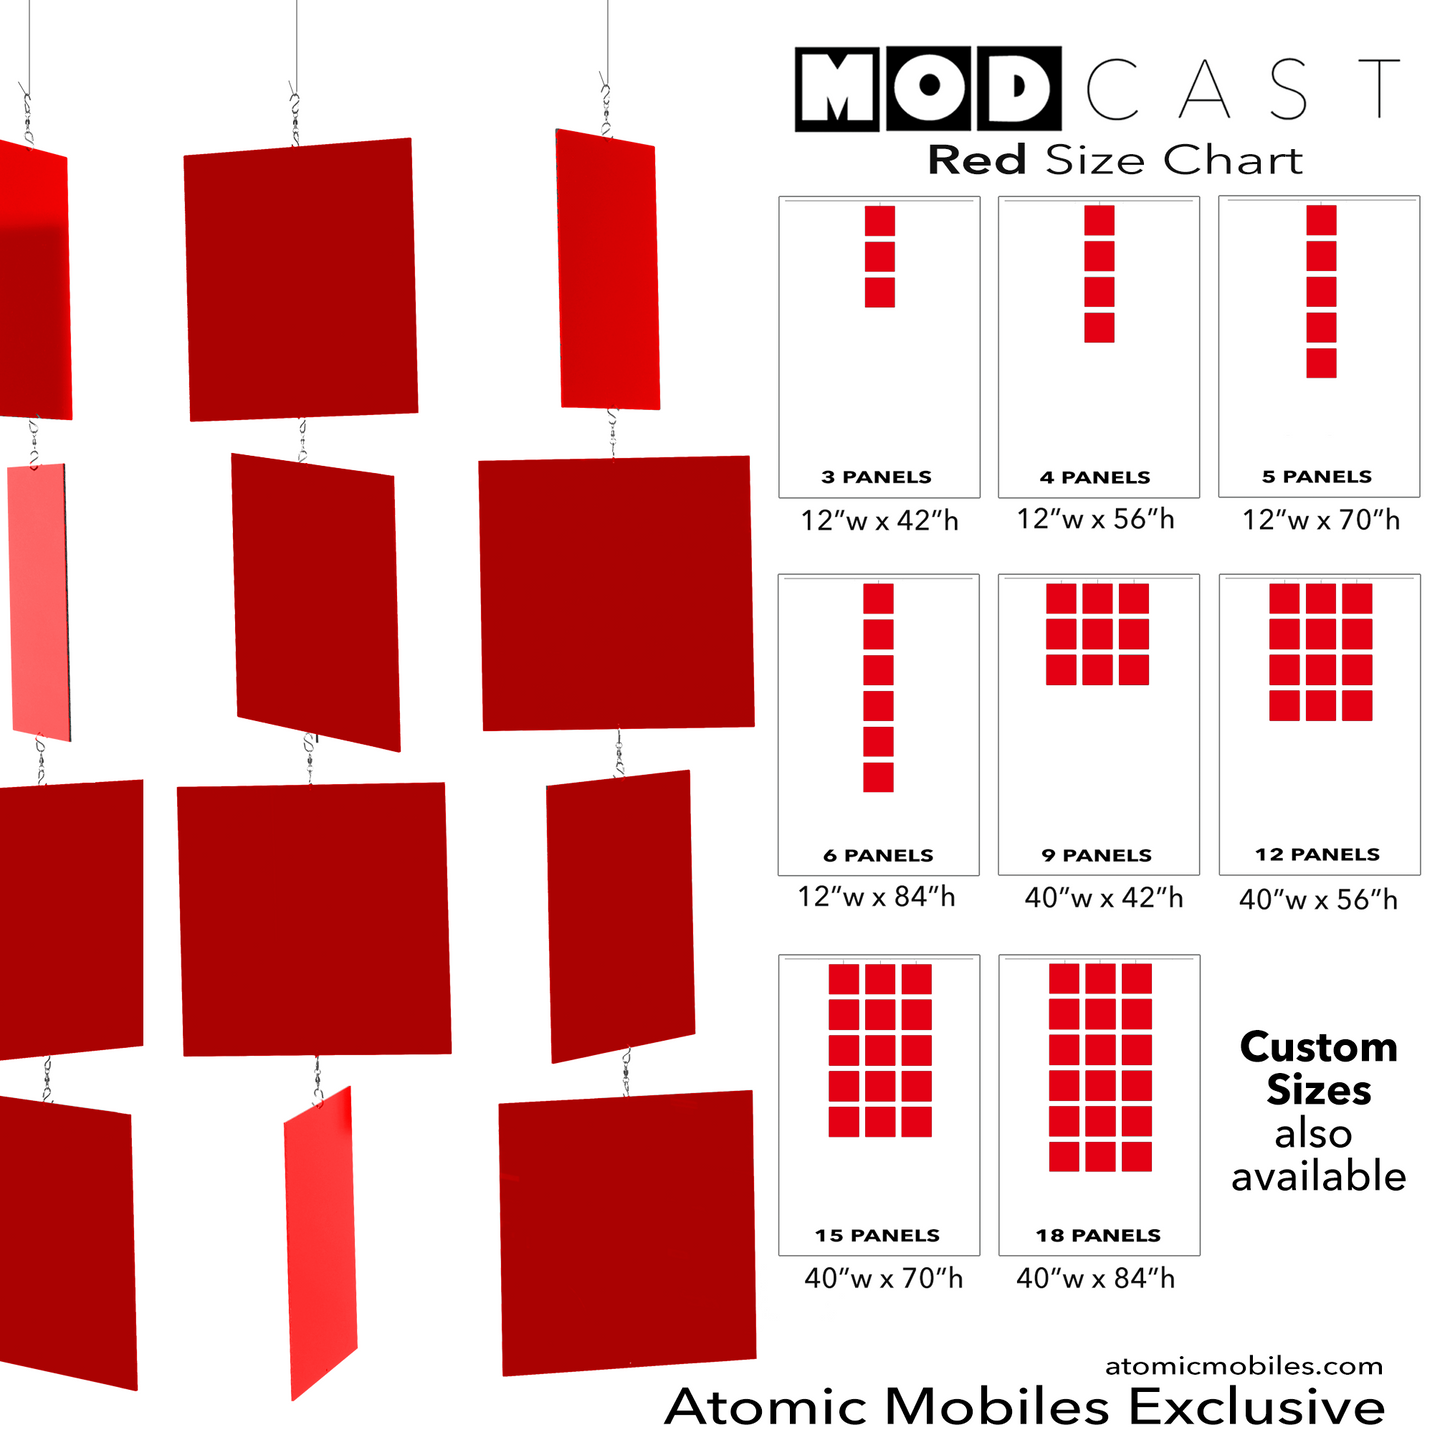 MODcast kinetic hanging art mobiles in Red glossy acrylic plexiglass panels - mid century modern style home decor by AtomicMobiles.com